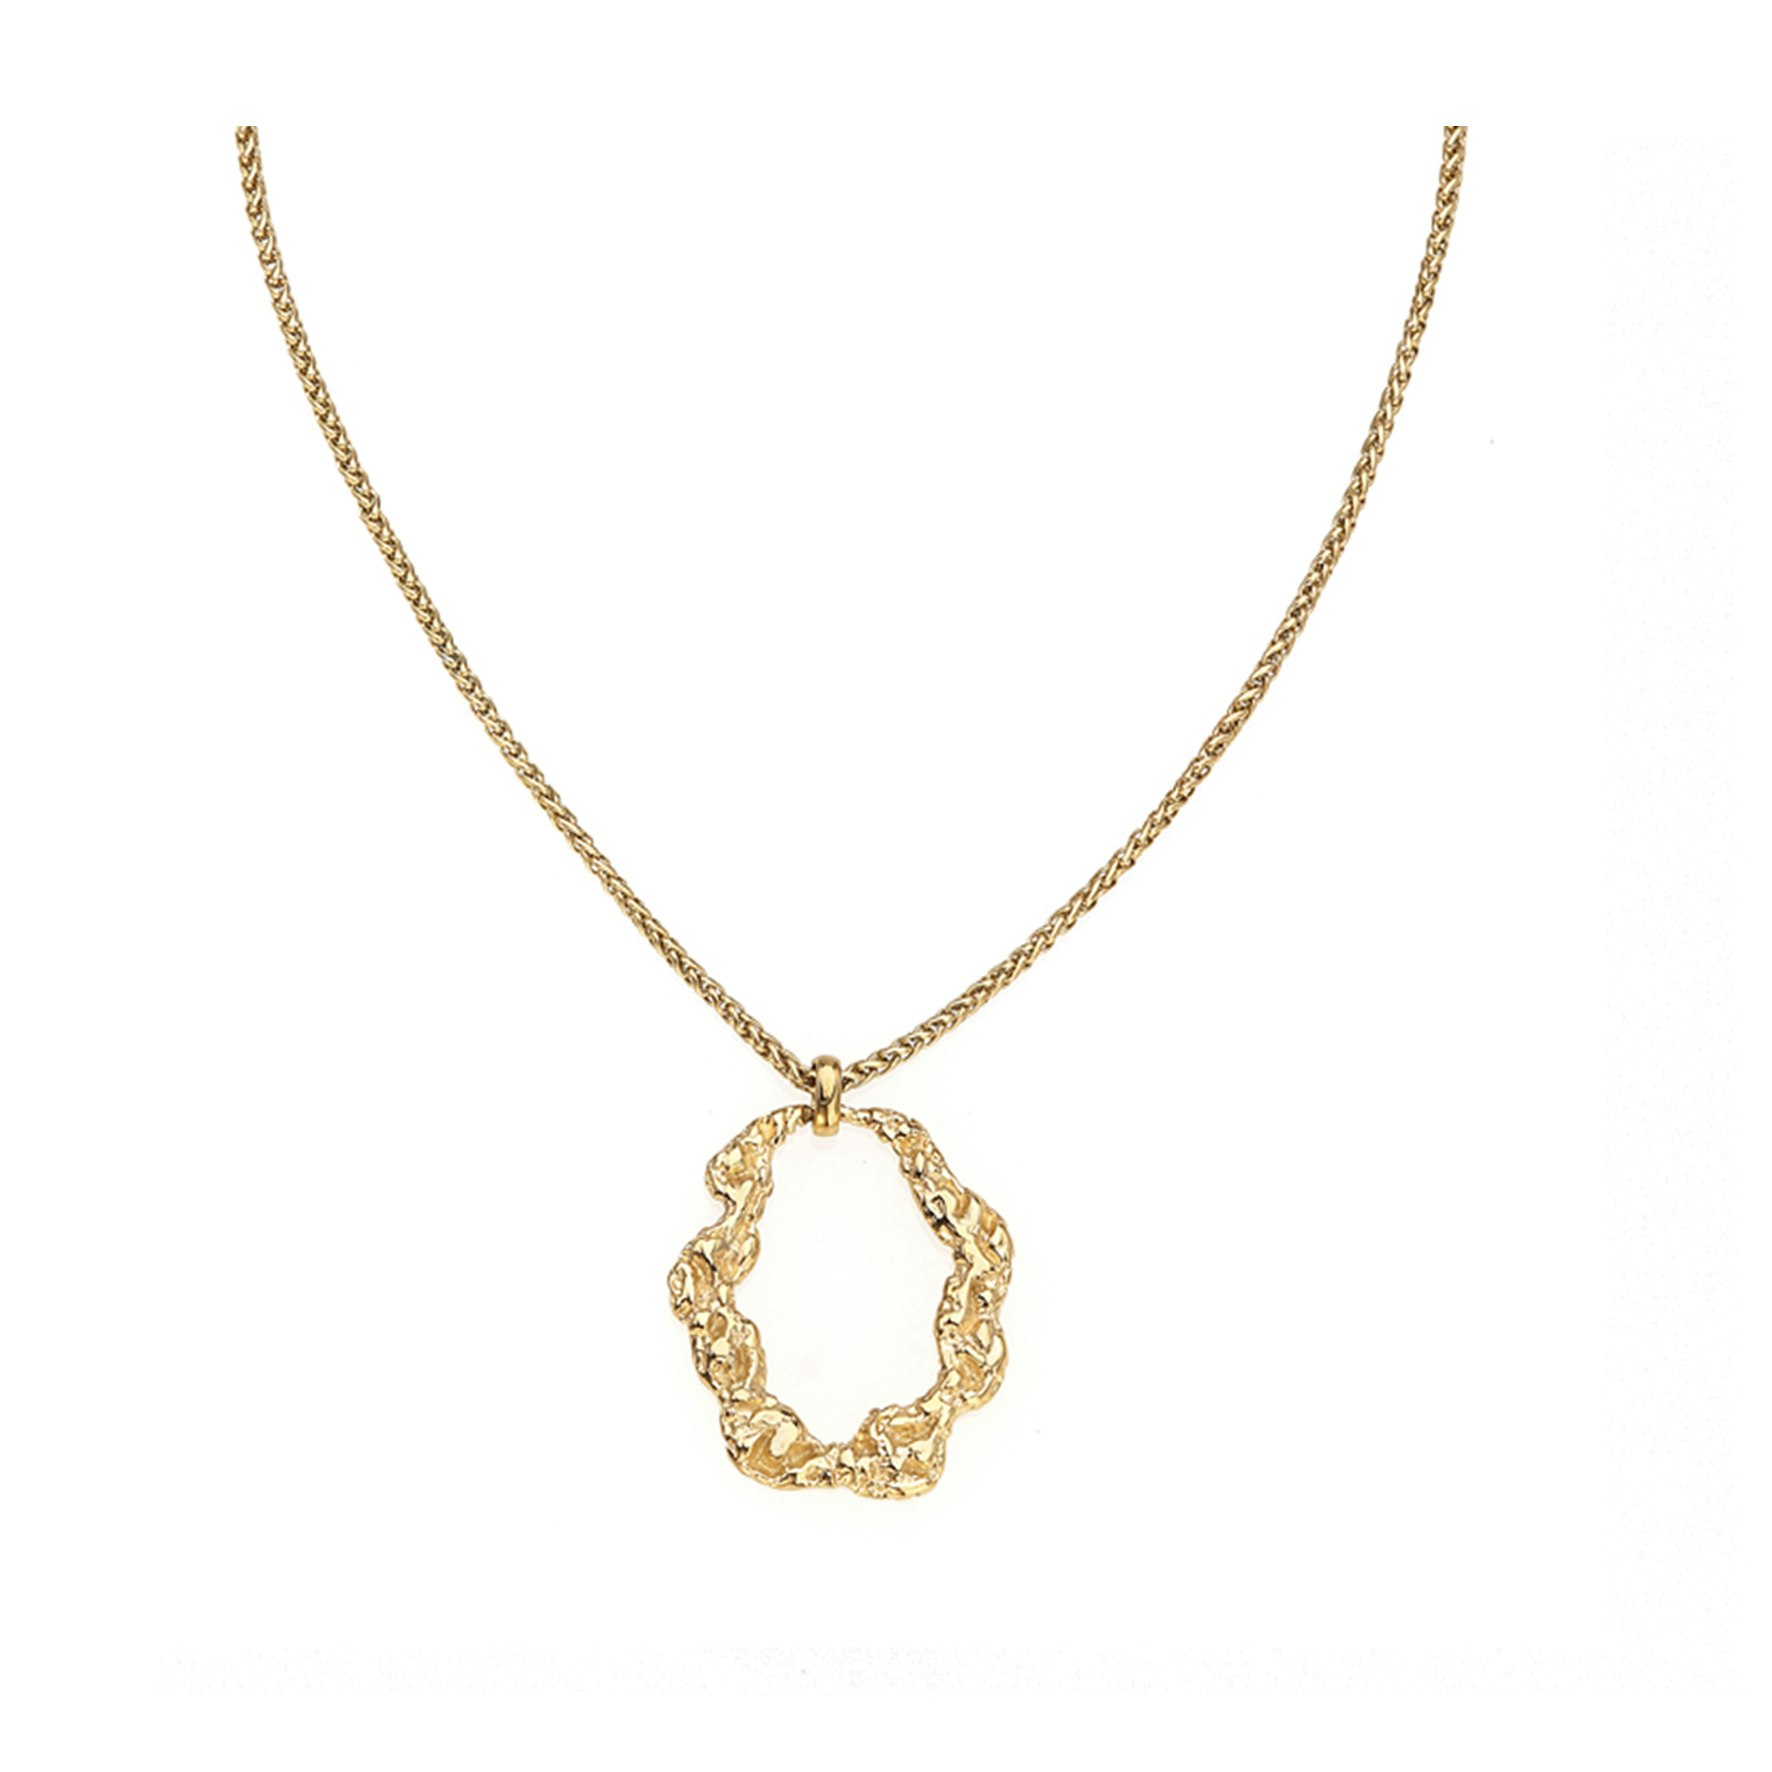 Xenia x Sistie 2nd Necklace from Sistie 2nd in Goldplated stainless steel